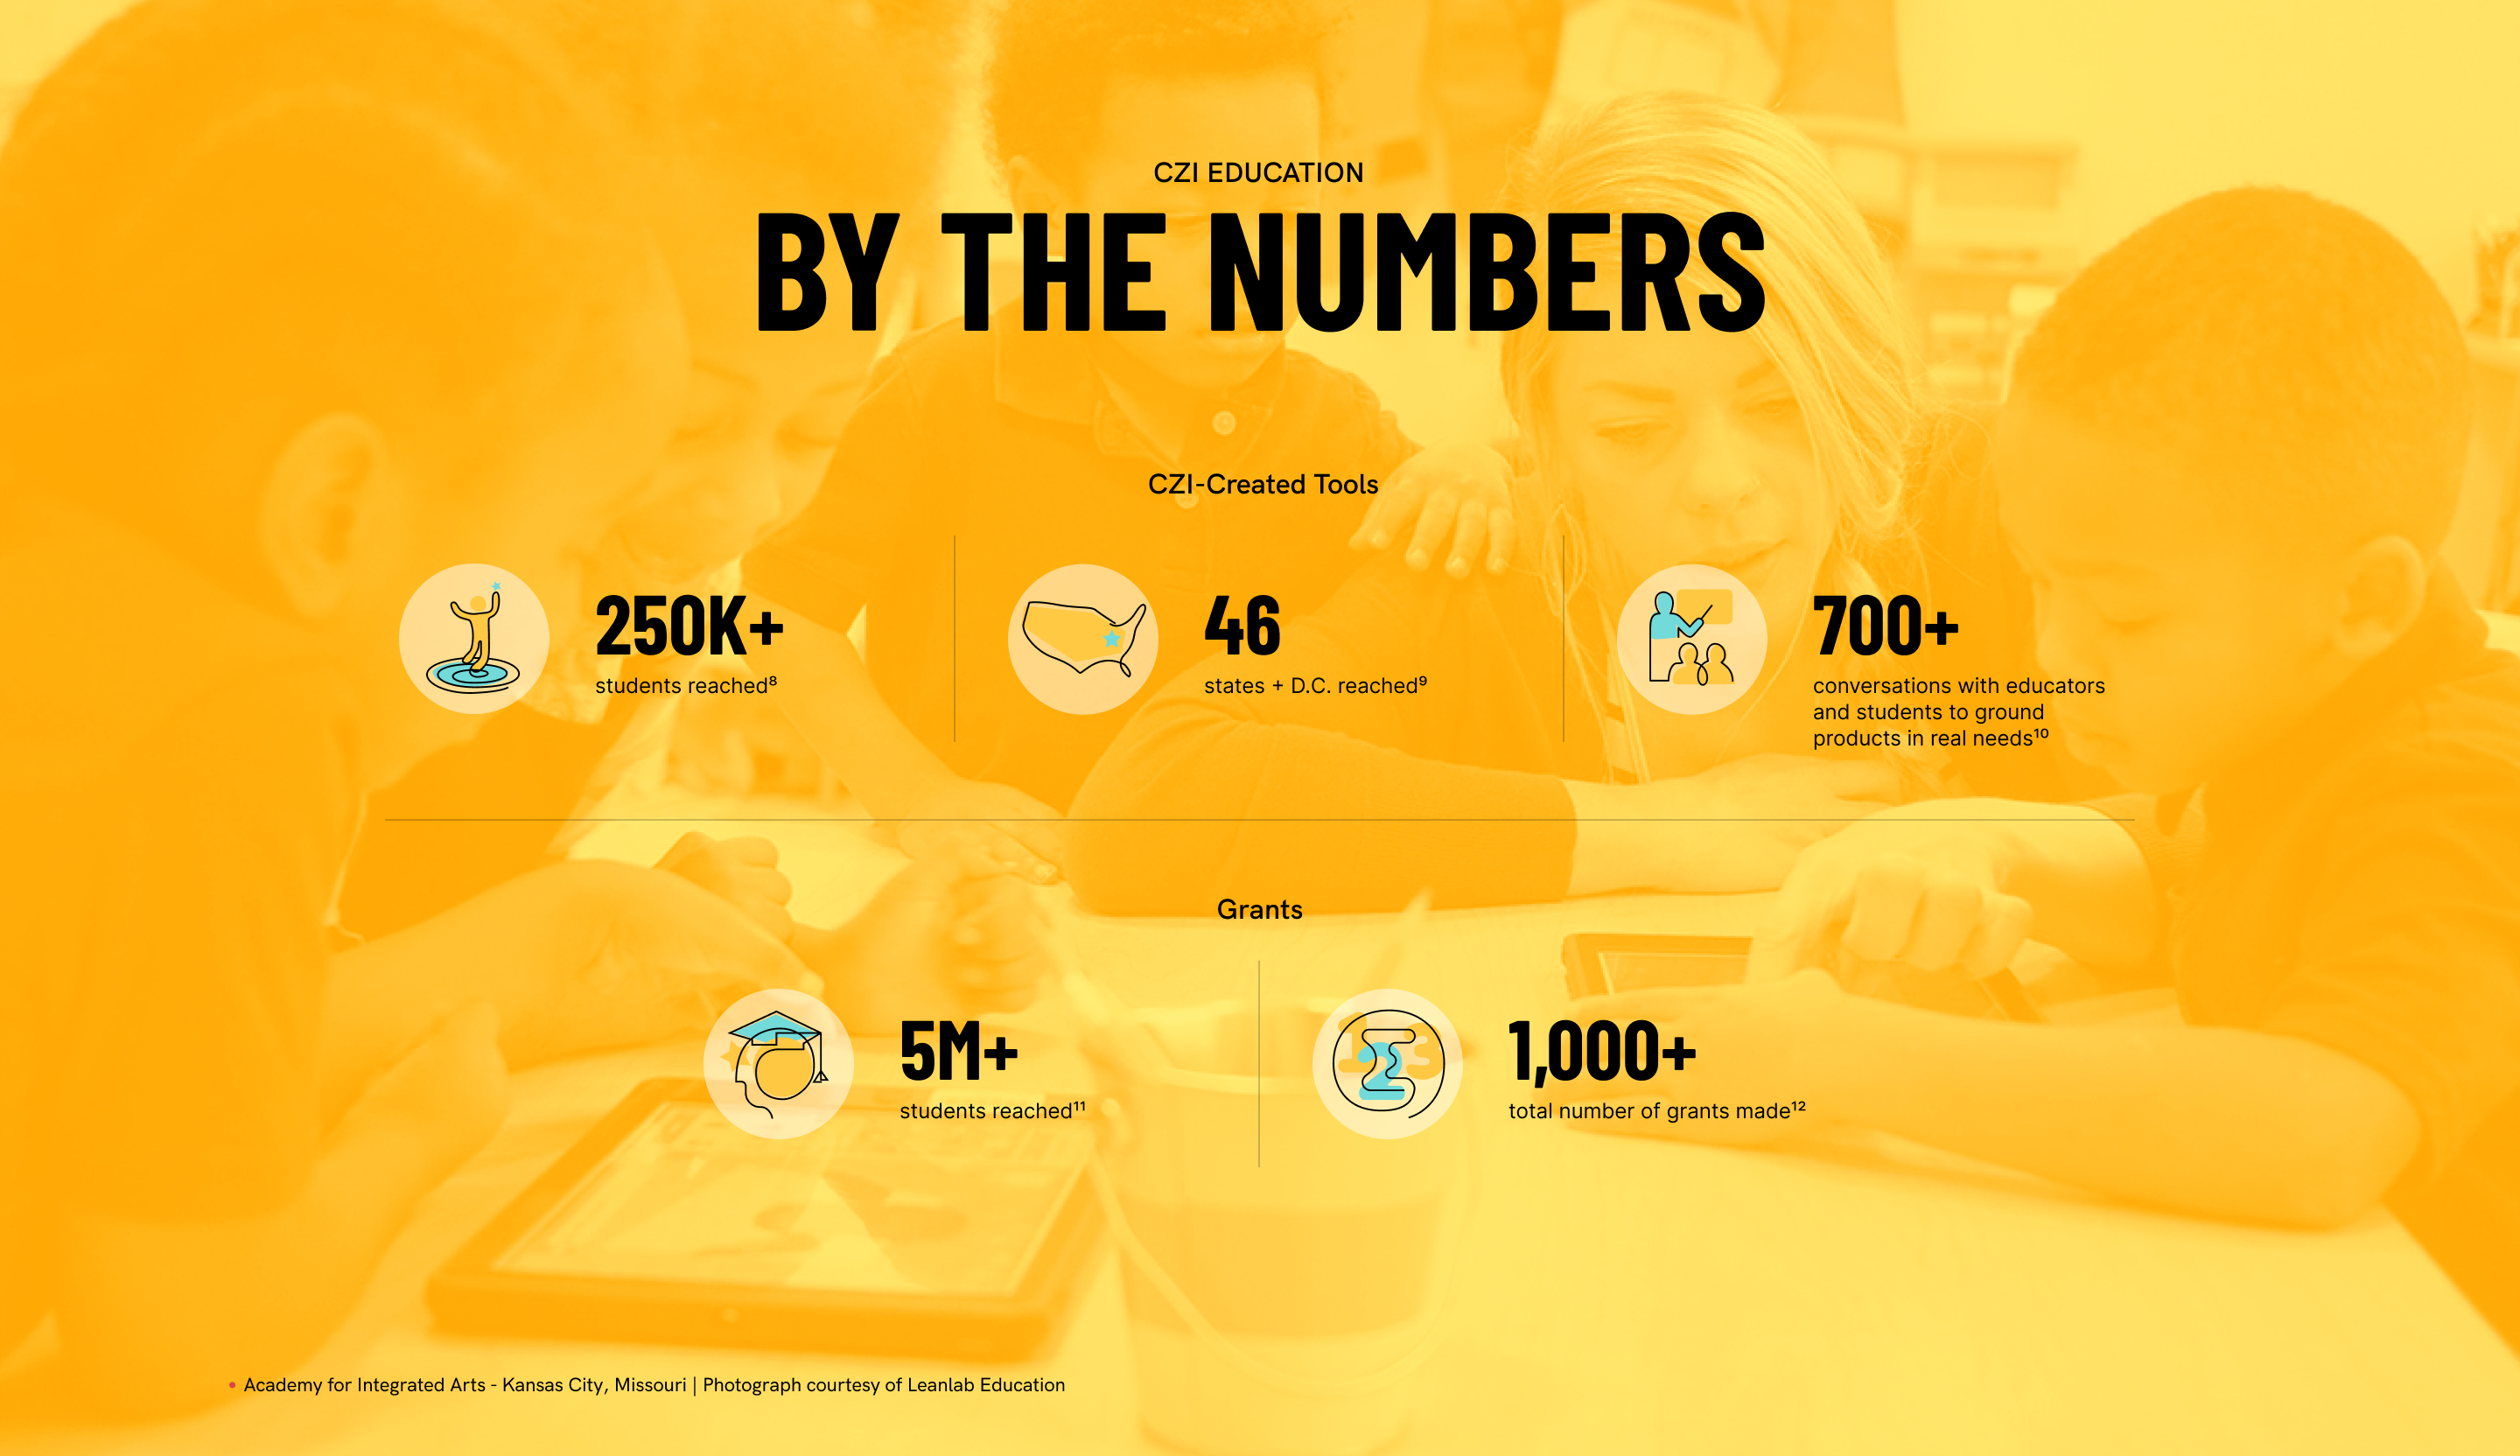 Infographic of CZI Education titled By the numbers. CZI created tools reached by 250 plus students in 46 states. 700 plus conversations with educators and students to ground products in real needs. CZI has given over 1000 grants reaching over 5 million students.